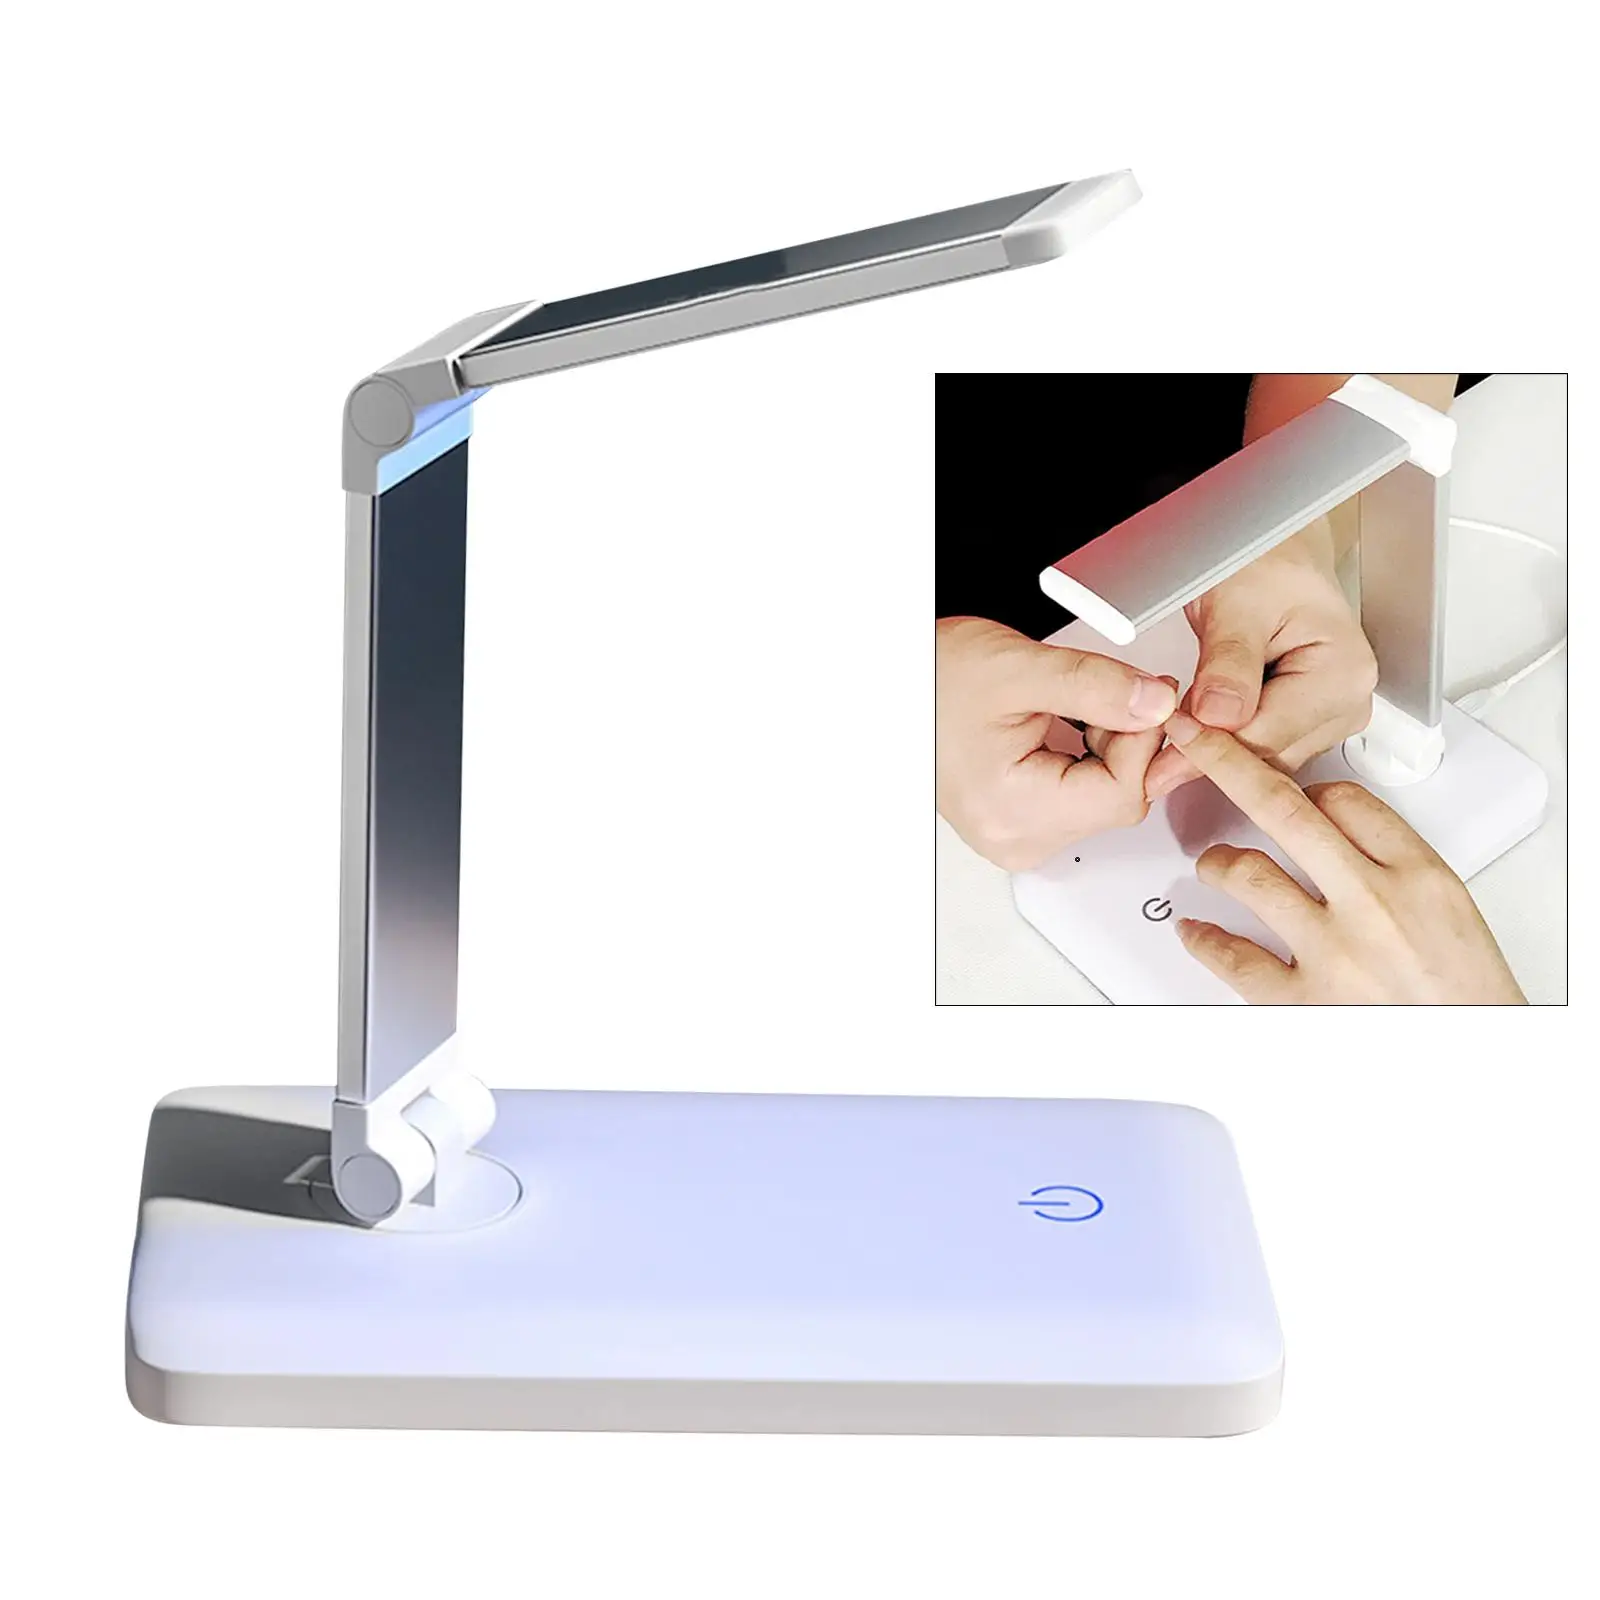 LED Nail Lamp Rechargeable 12W Portable Supplies  ,Beauty Accessories Heating Lamp Nail Light for  Art Salon Girls Women